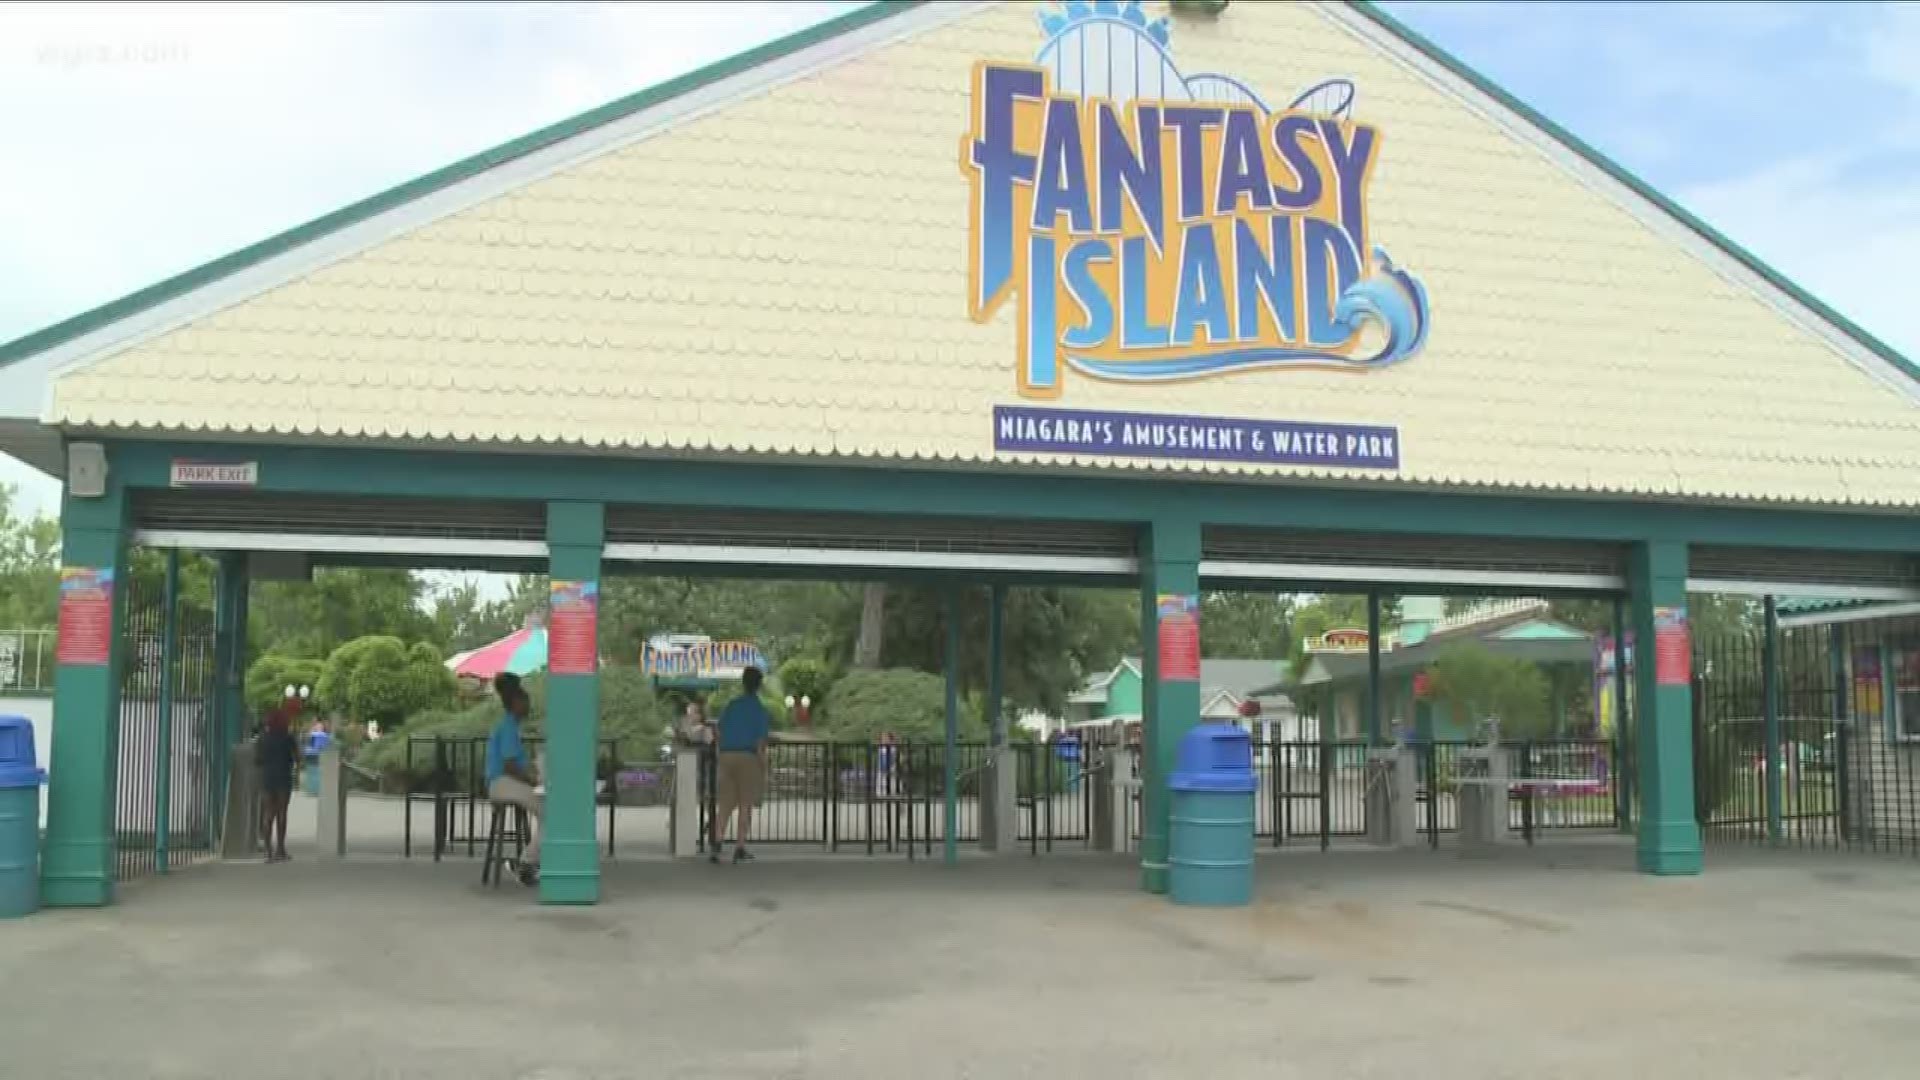 Hundreds of people have complained about Fantasy Island and now they respond.